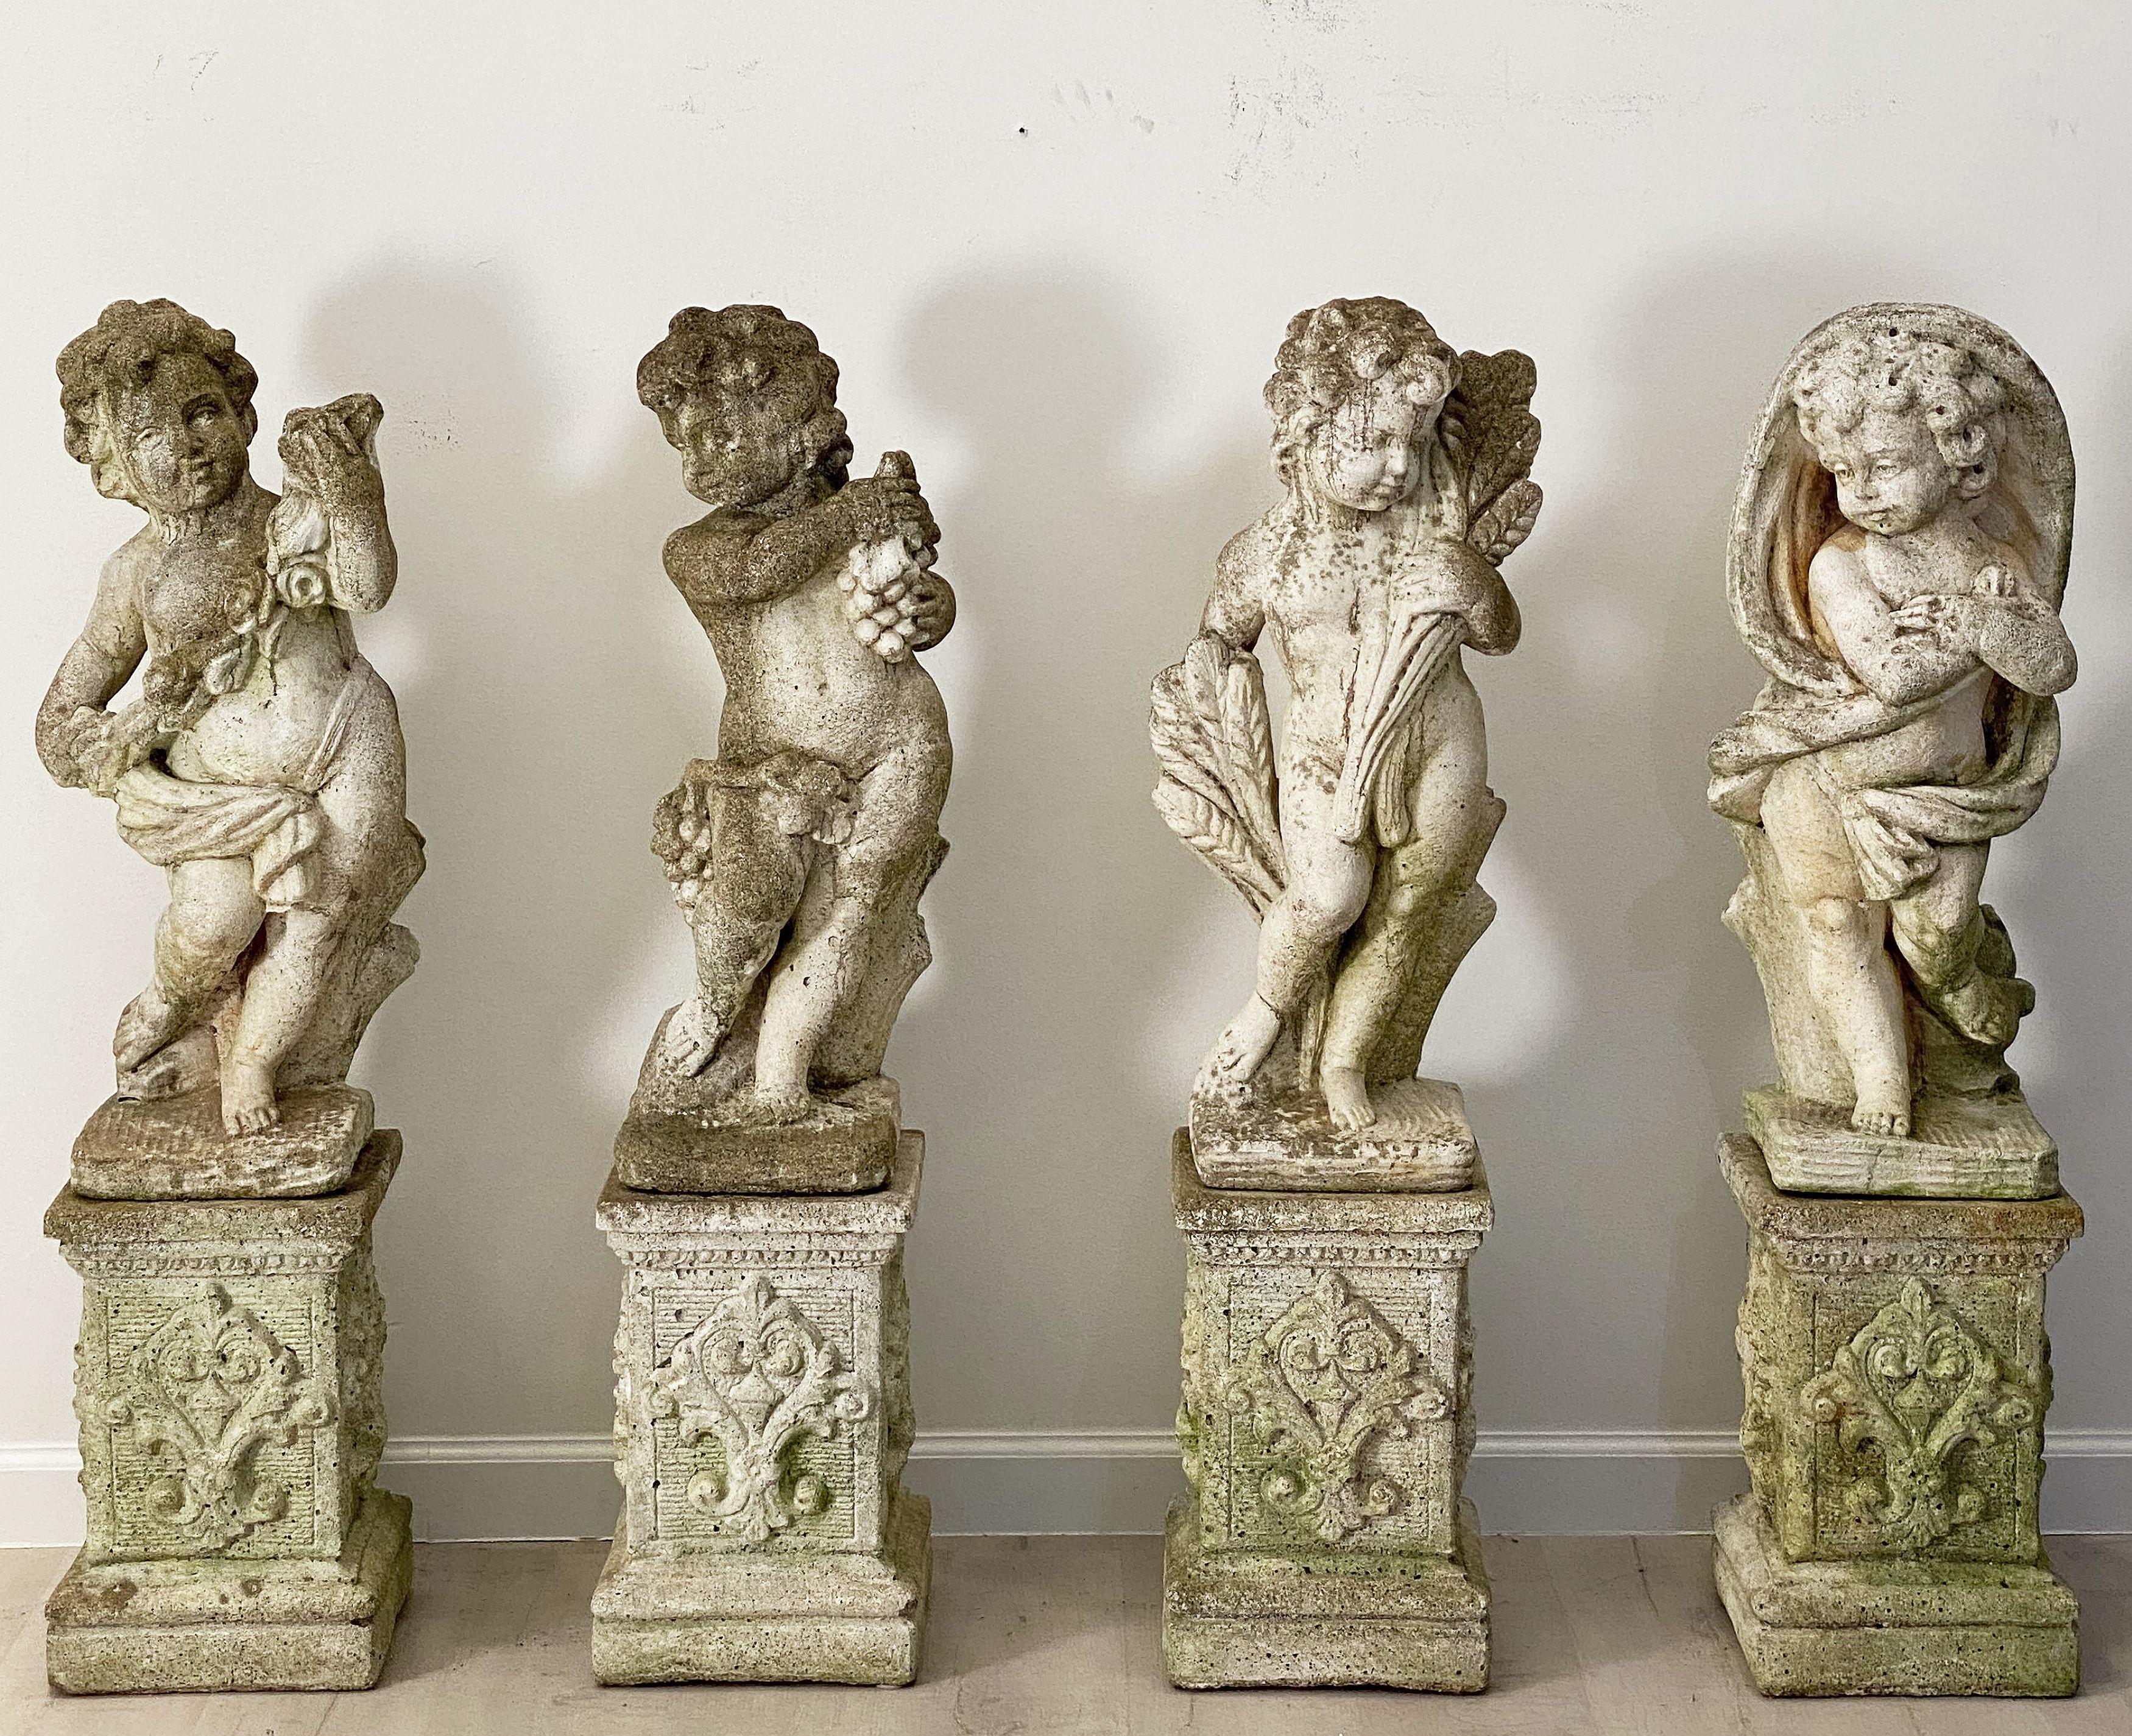 A superb collection of Italian garden statuary, of composition stone, featuring finely modeled representations of the Four Seasons - Spring, Summer, Autumn, and Winter - as stylized putti or cherubs - each statue standing on a square